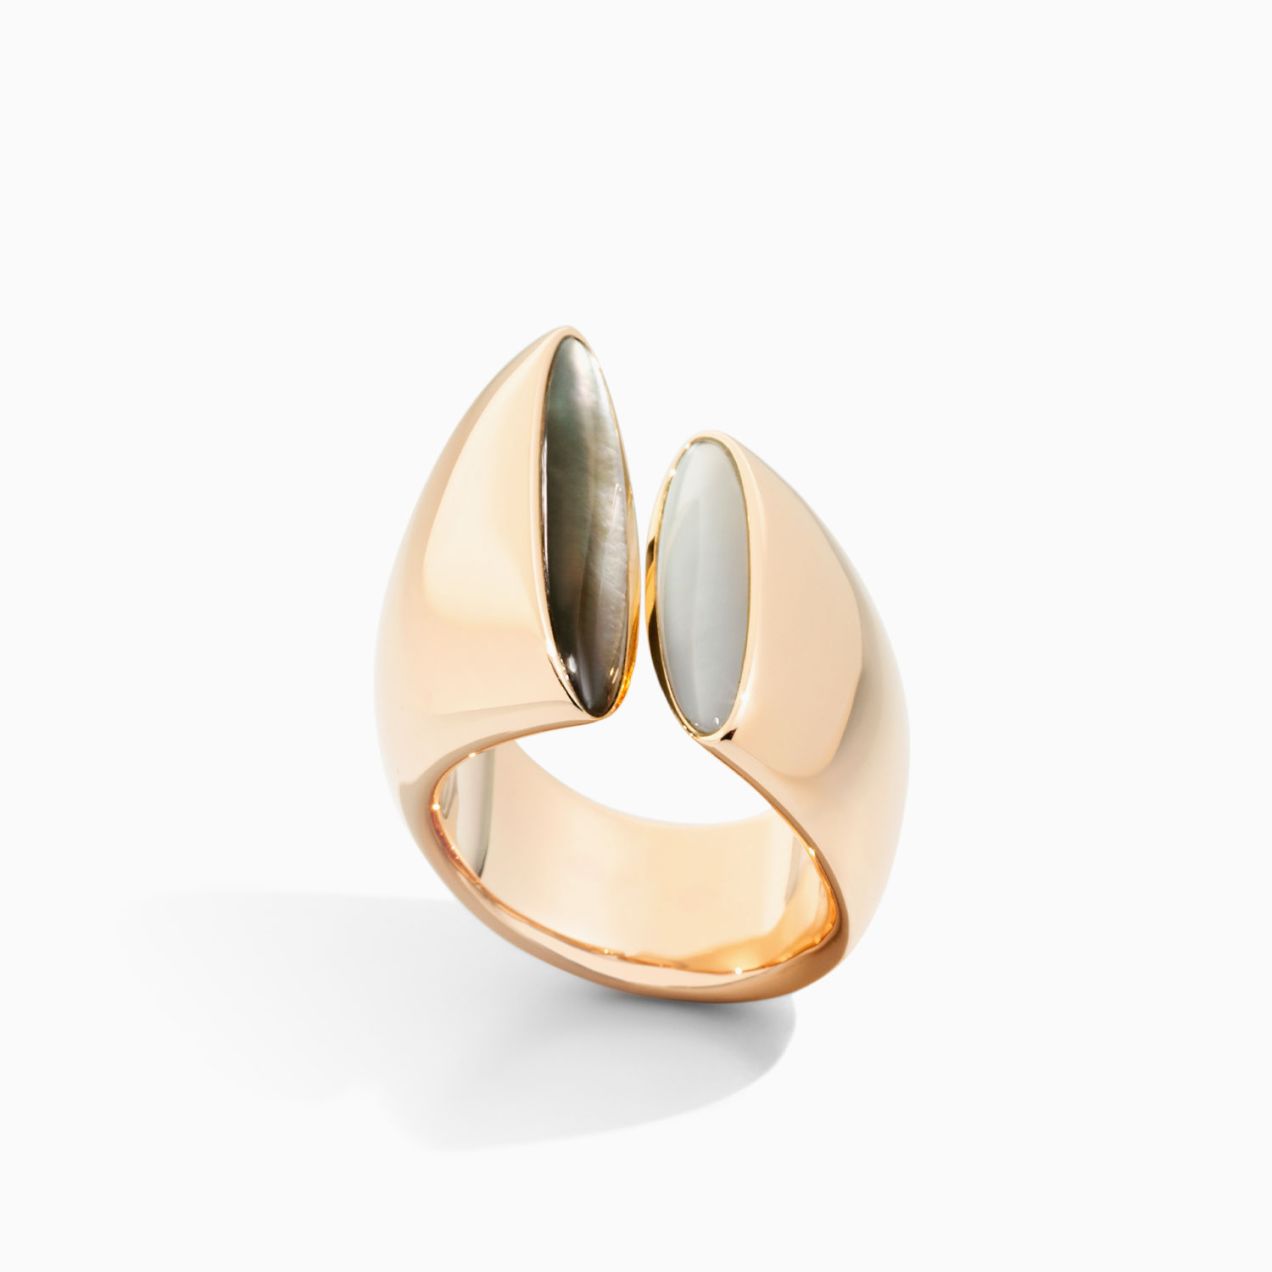 Vhernier eclisse ring in rose gold with mother of pearl